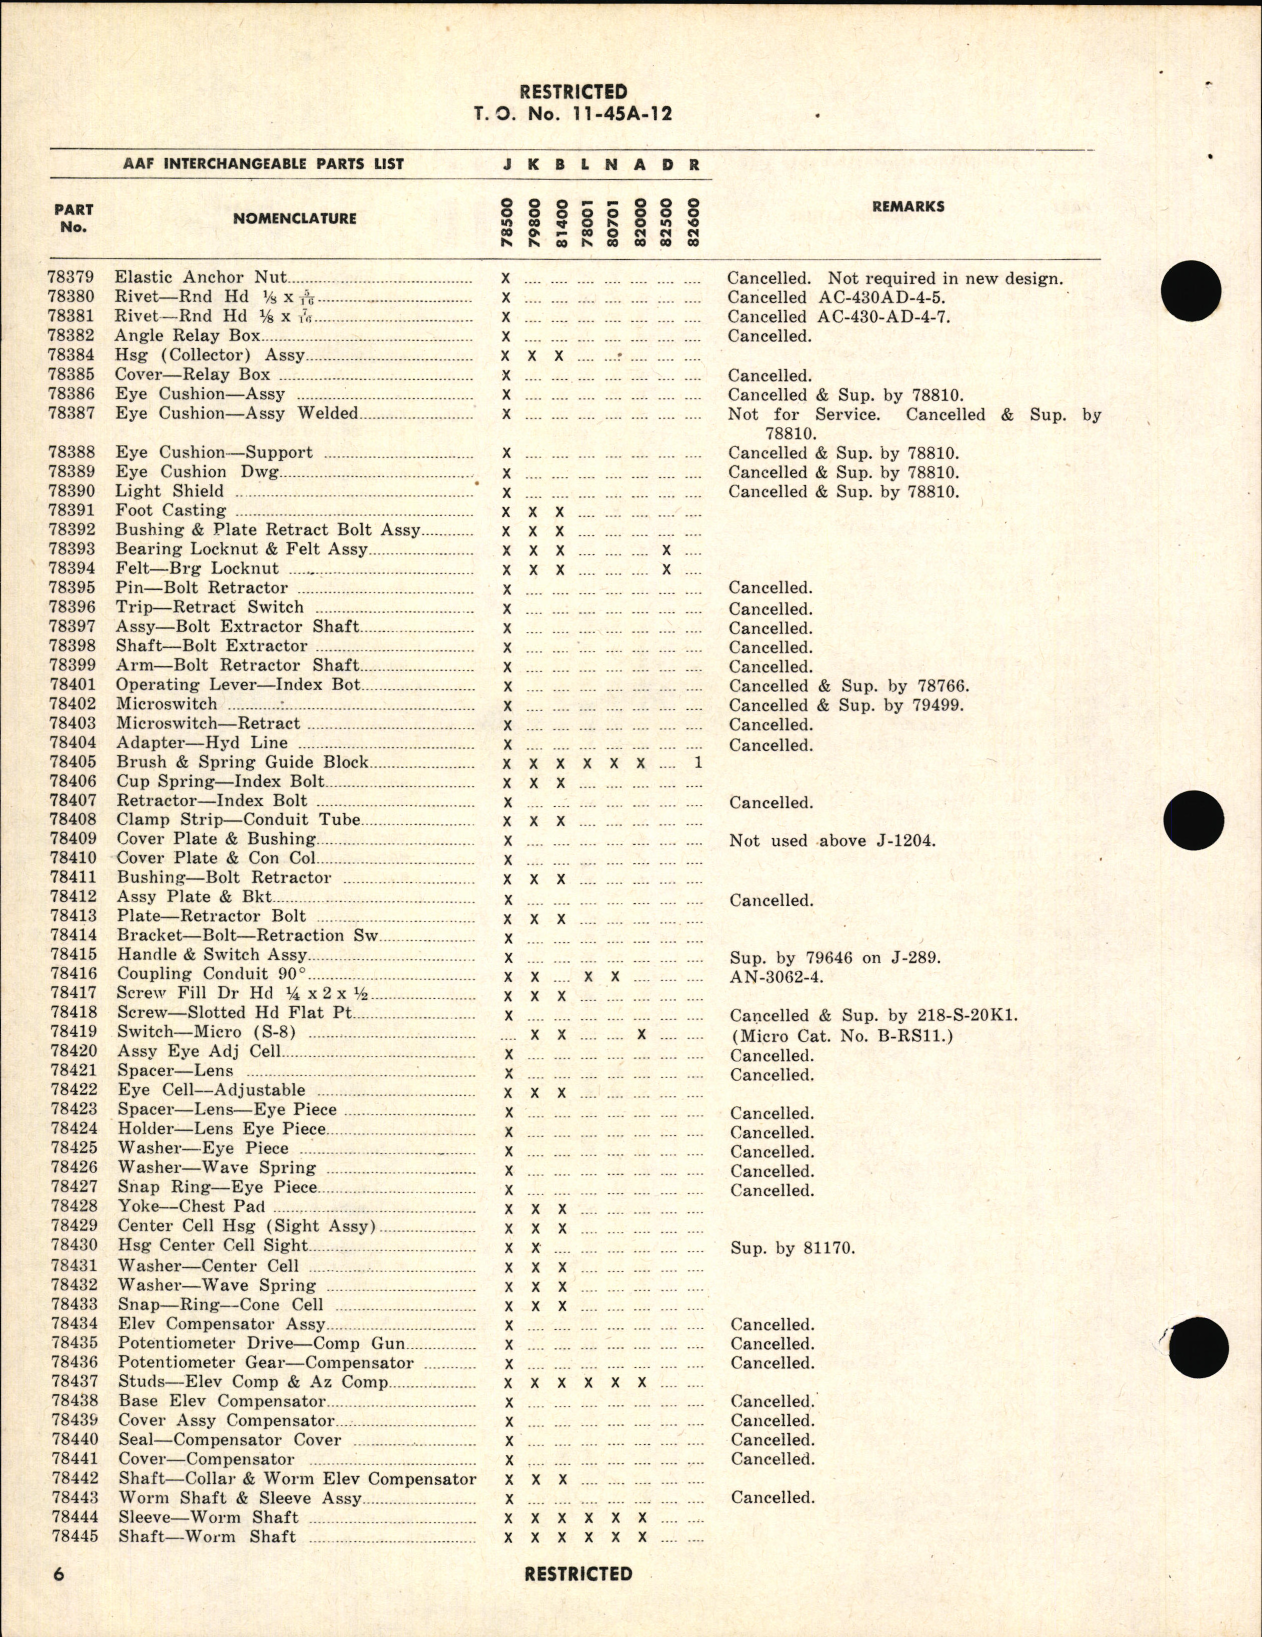 Sample page 8 from AirCorps Library document: Interchangeable Parts List for Bendix Power Operated Turrets